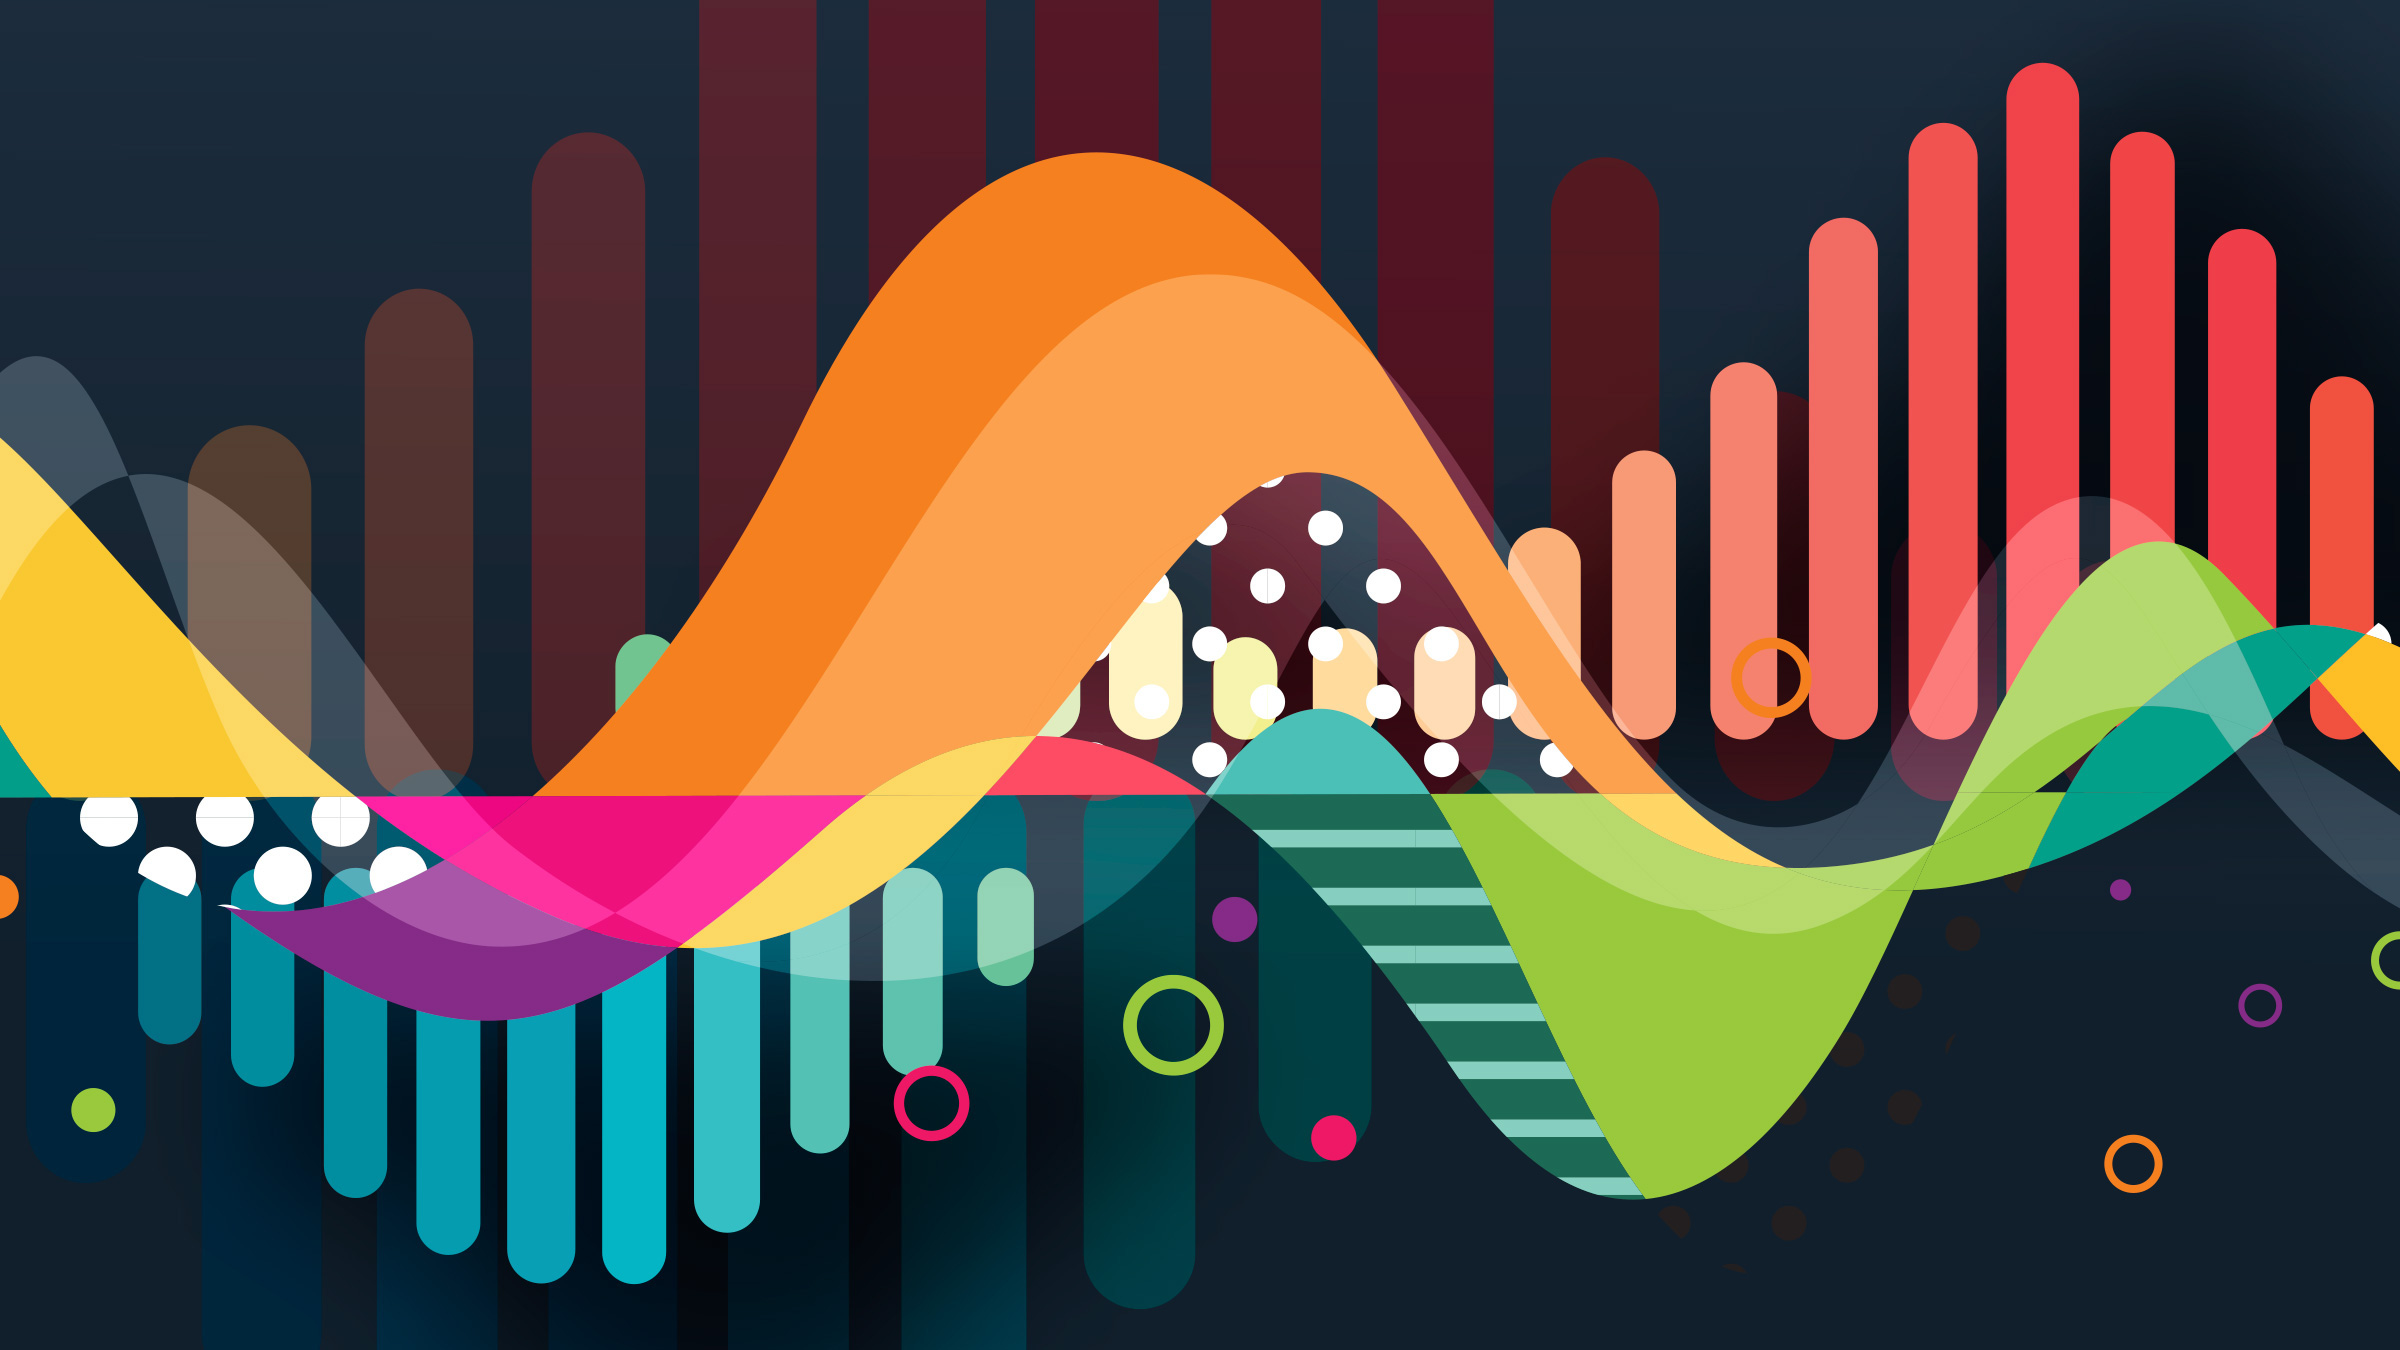 stylized wave and graph, illustration